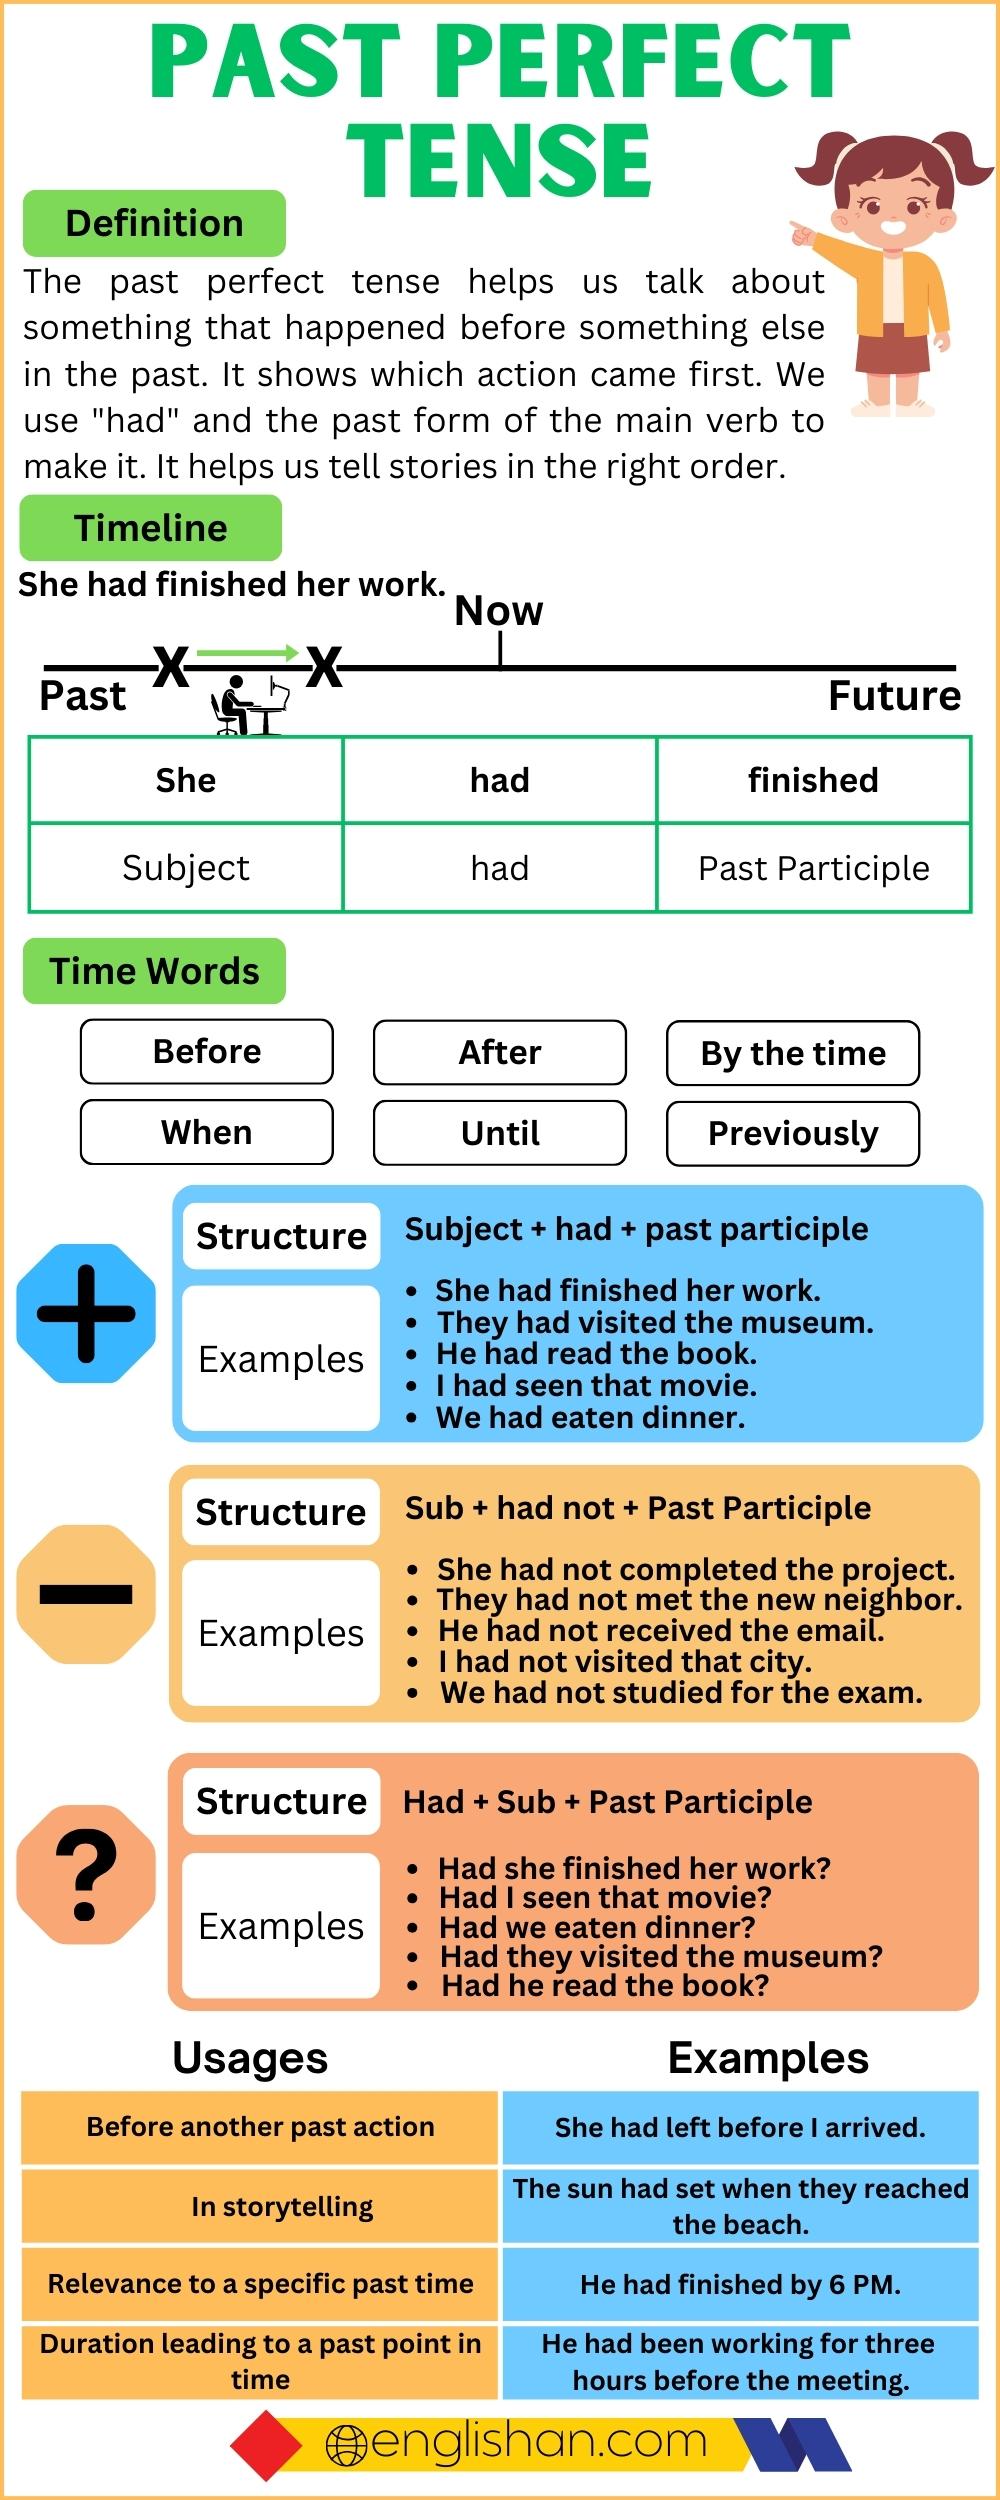 Past Perfect Tense Chart with Definition, Rules, Structure, Usages, Example Sentences